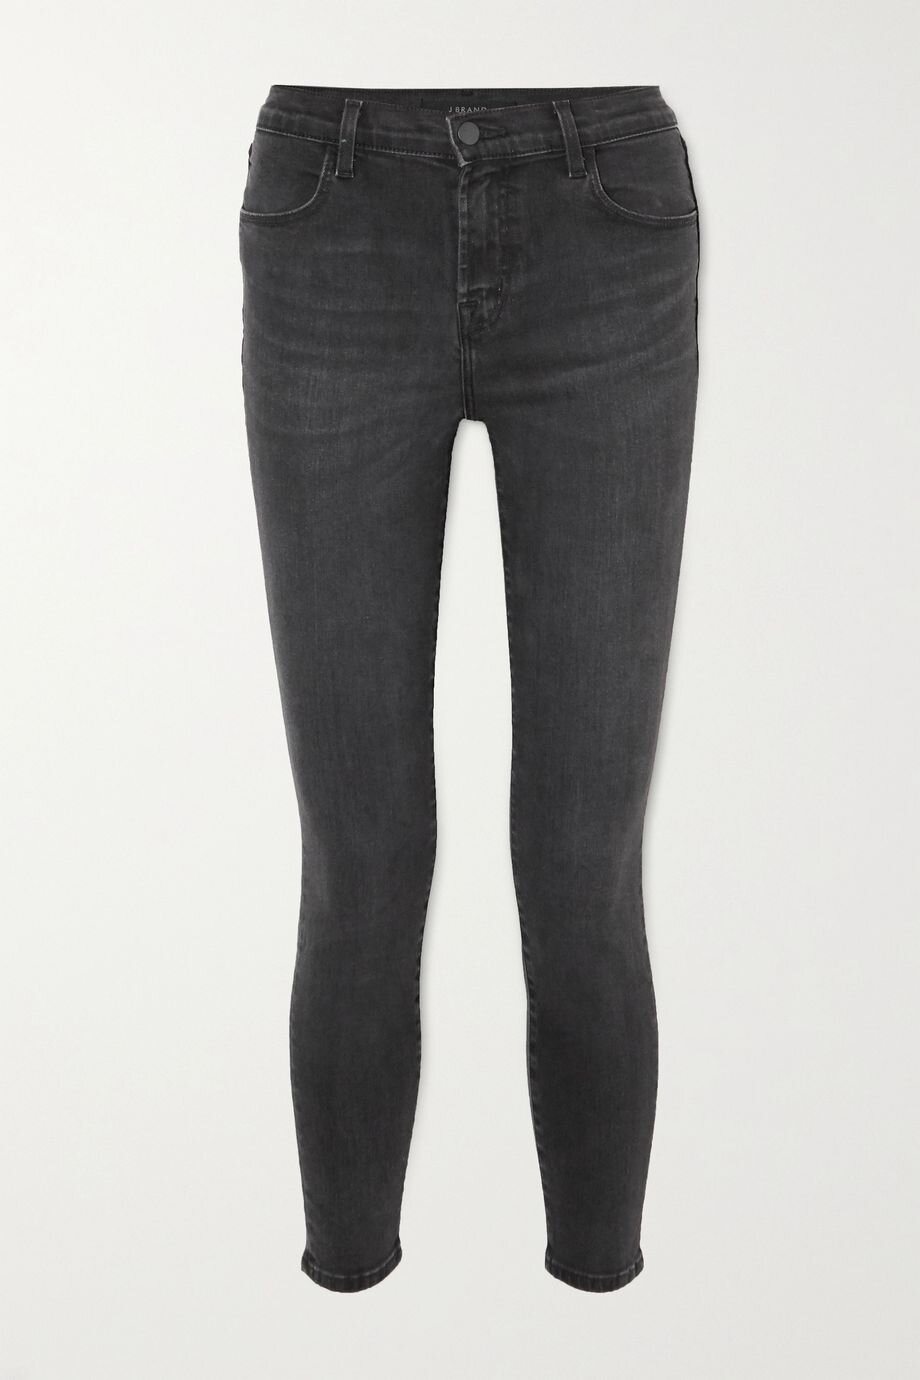 For pokker ciffer Nautisk J Brand Alana Cropped High-Rise Skinny Jeans in Grey — UFO No More